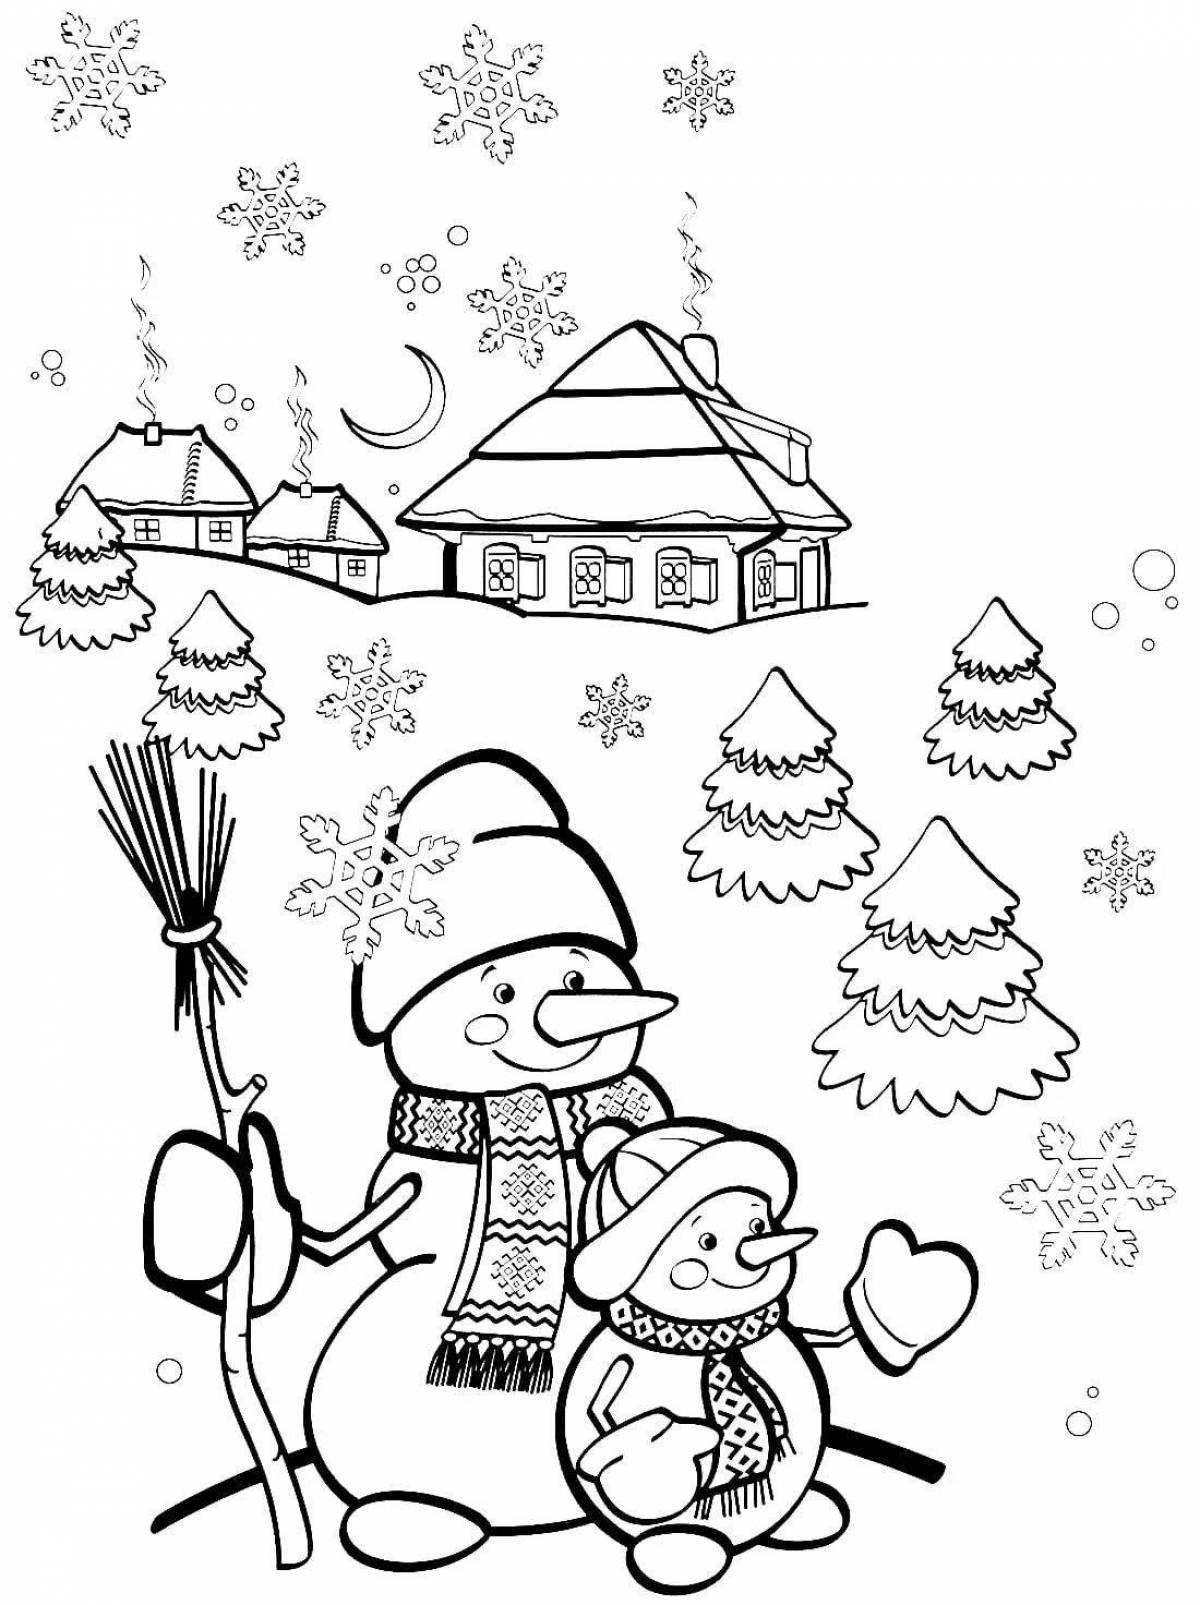 Merry winter coloring for children